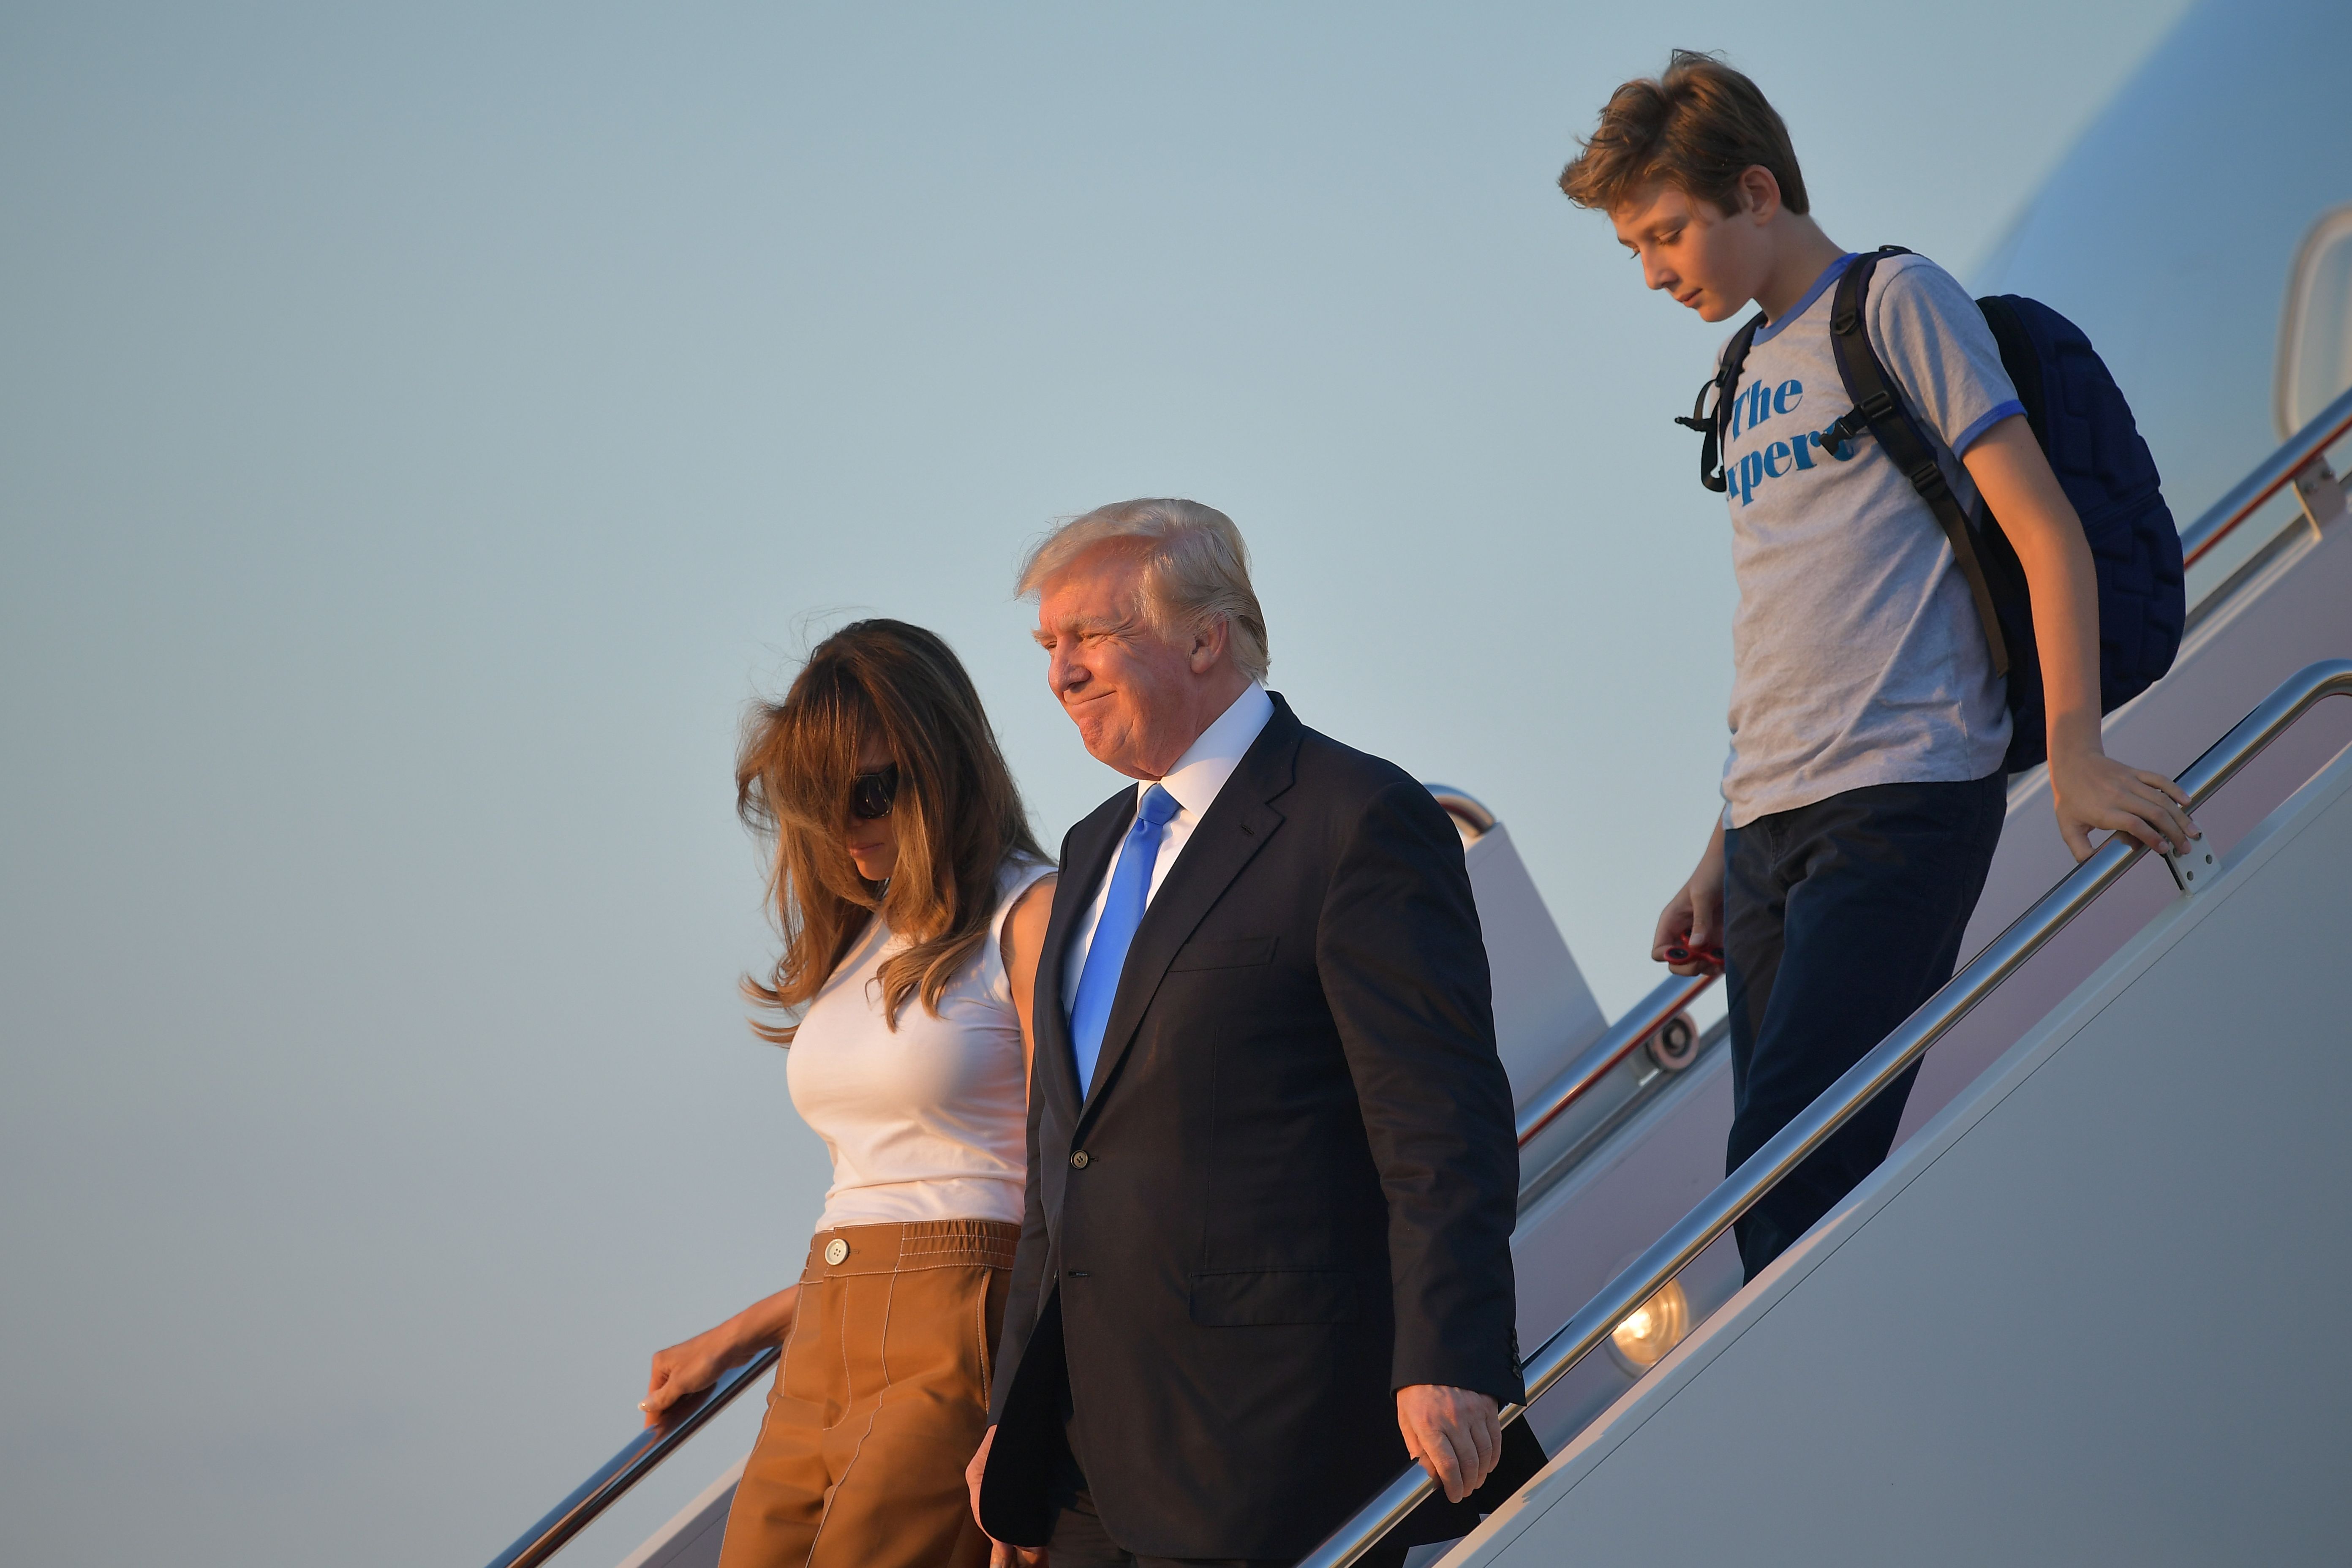 US President Donald Trump (C), first lady Melania Trump, and their son Barron Trump walk off Air Force One after arriving at Andrews Airforce base, Maryland on June 11 2017. Trump is returning to Washington, DC after spending the weekend at this Bedminster, New Jersey golf club. MANDEL NGAN/AFP/Getty Images